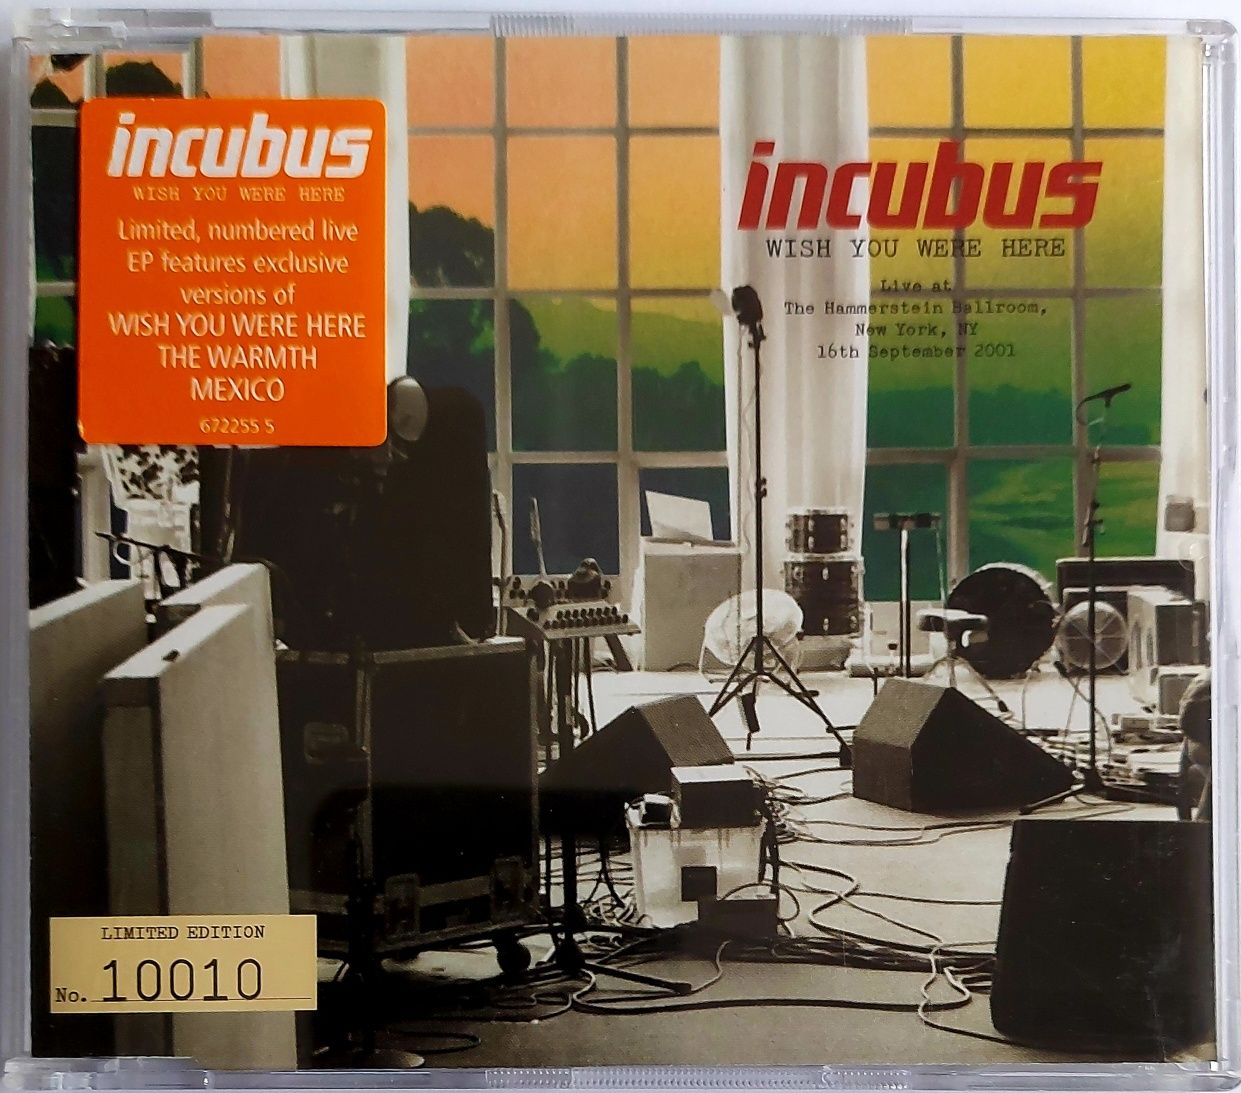 CDs Incubus Wsih You Were Here 2001r